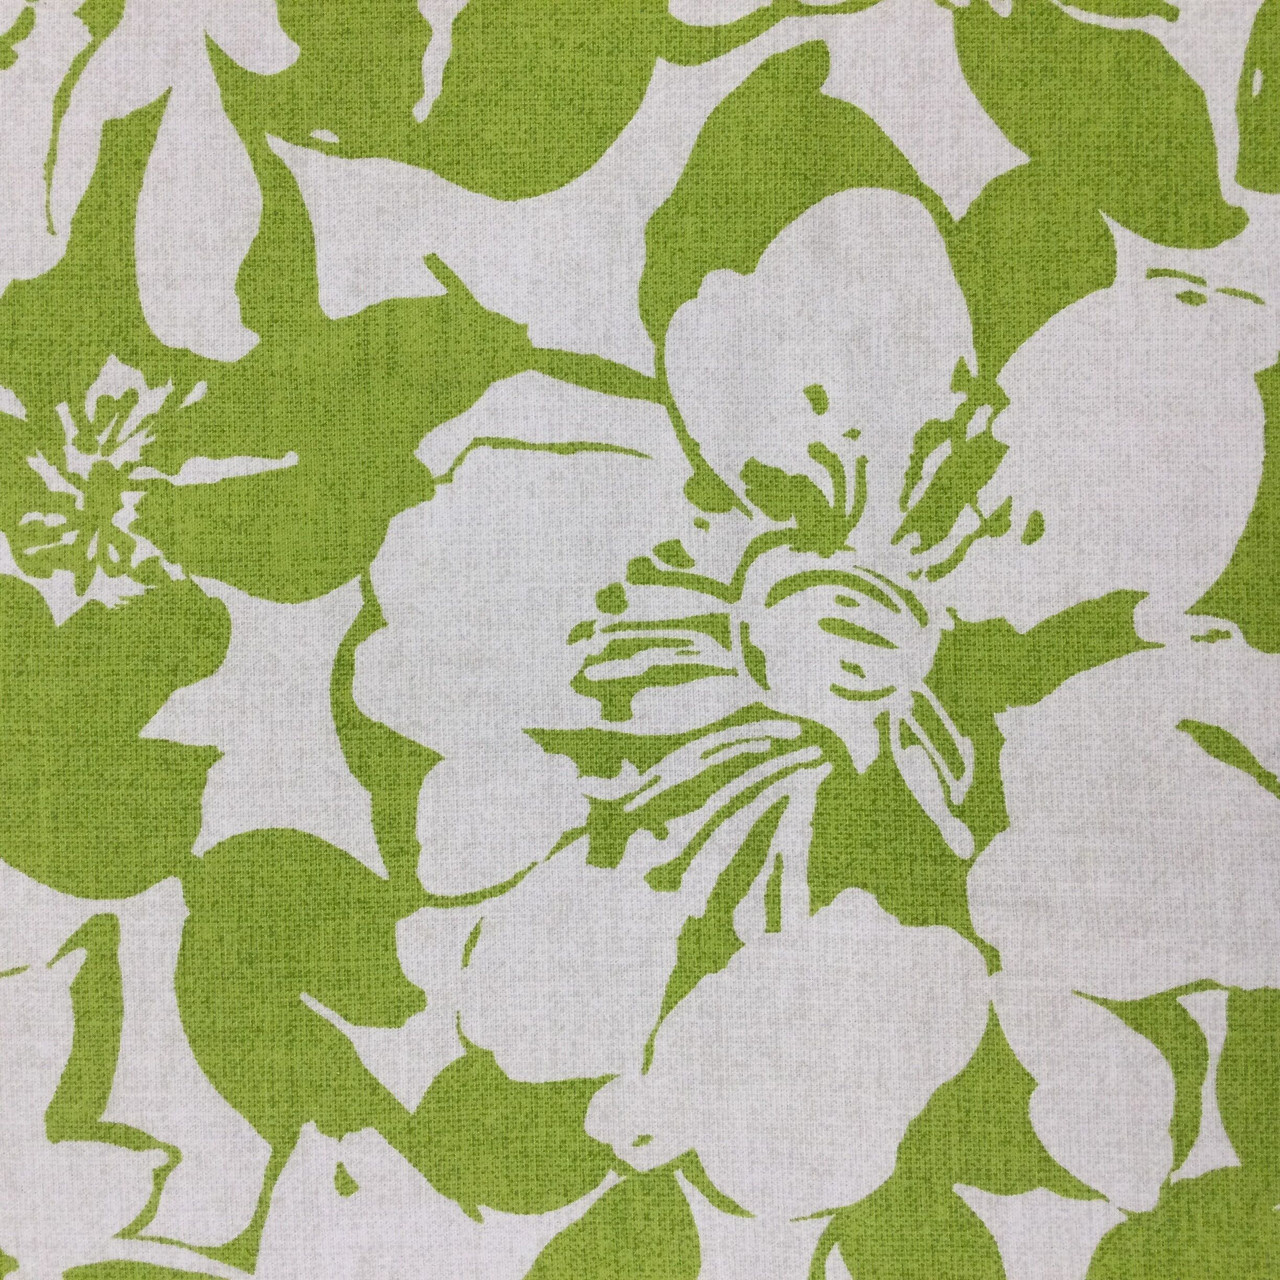 https://cdn11.bigcommerce.com/s-z9t2ne/images/stencil/1280x1280/products/34909/372244/sunfield-fabric-color-lime__10742.1629785924.jpg?c=2